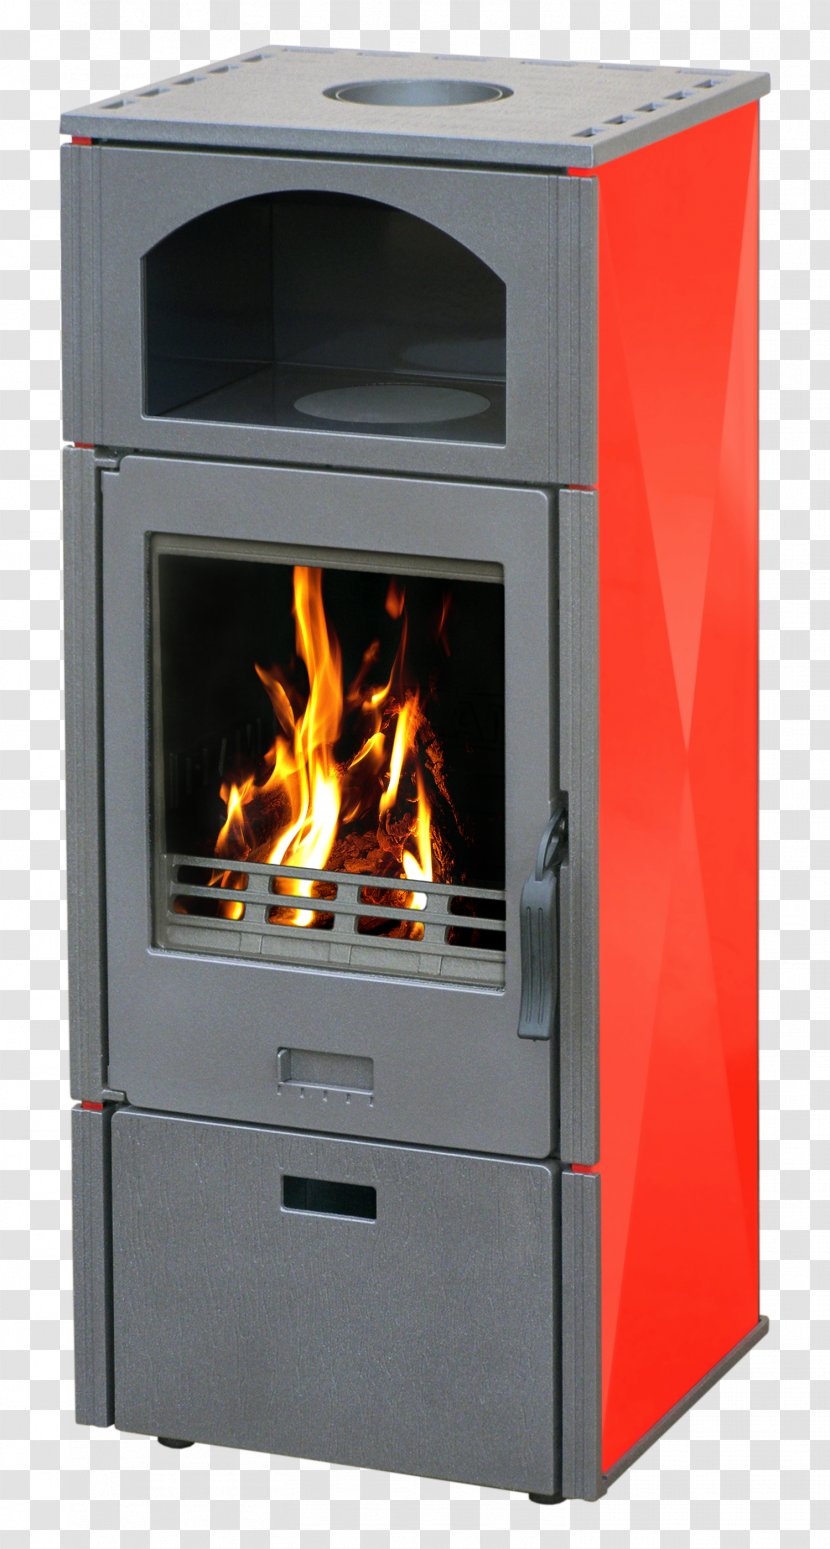 Wood Stoves Furnace Fireplace - Stove Transparent PNG